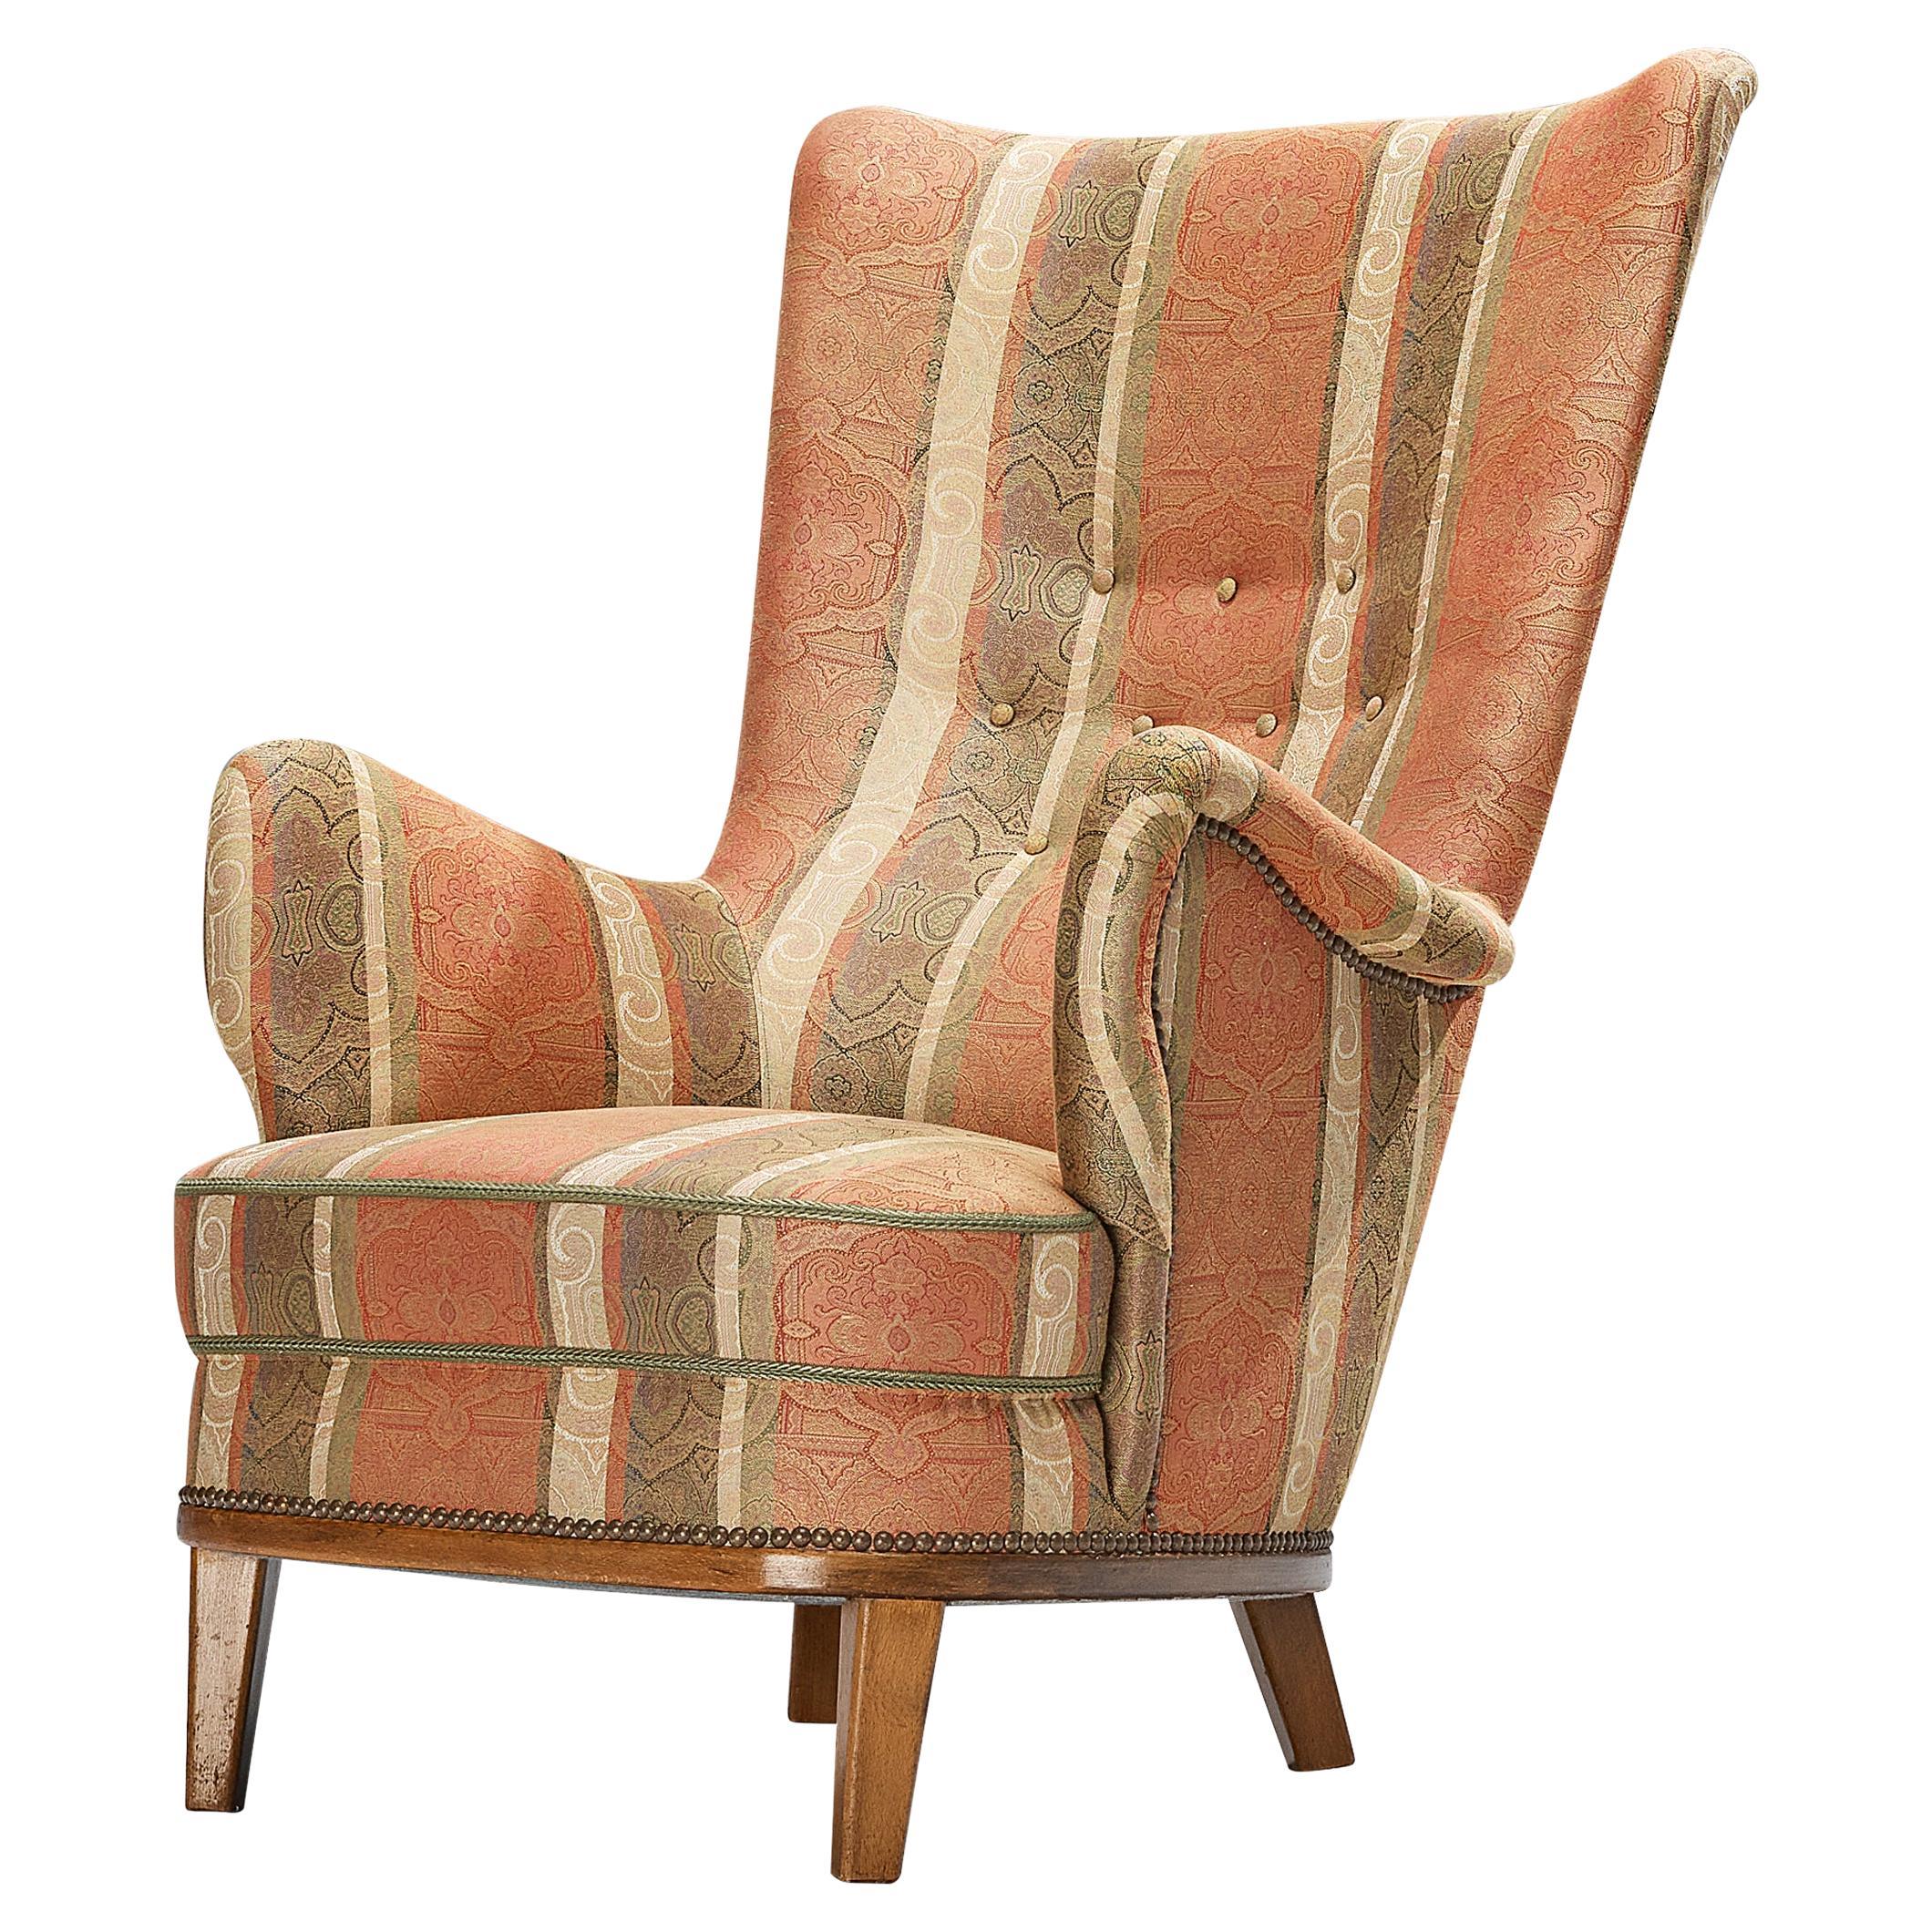 Charming Danish Easy Chair in Patterned Upholstery For Sale